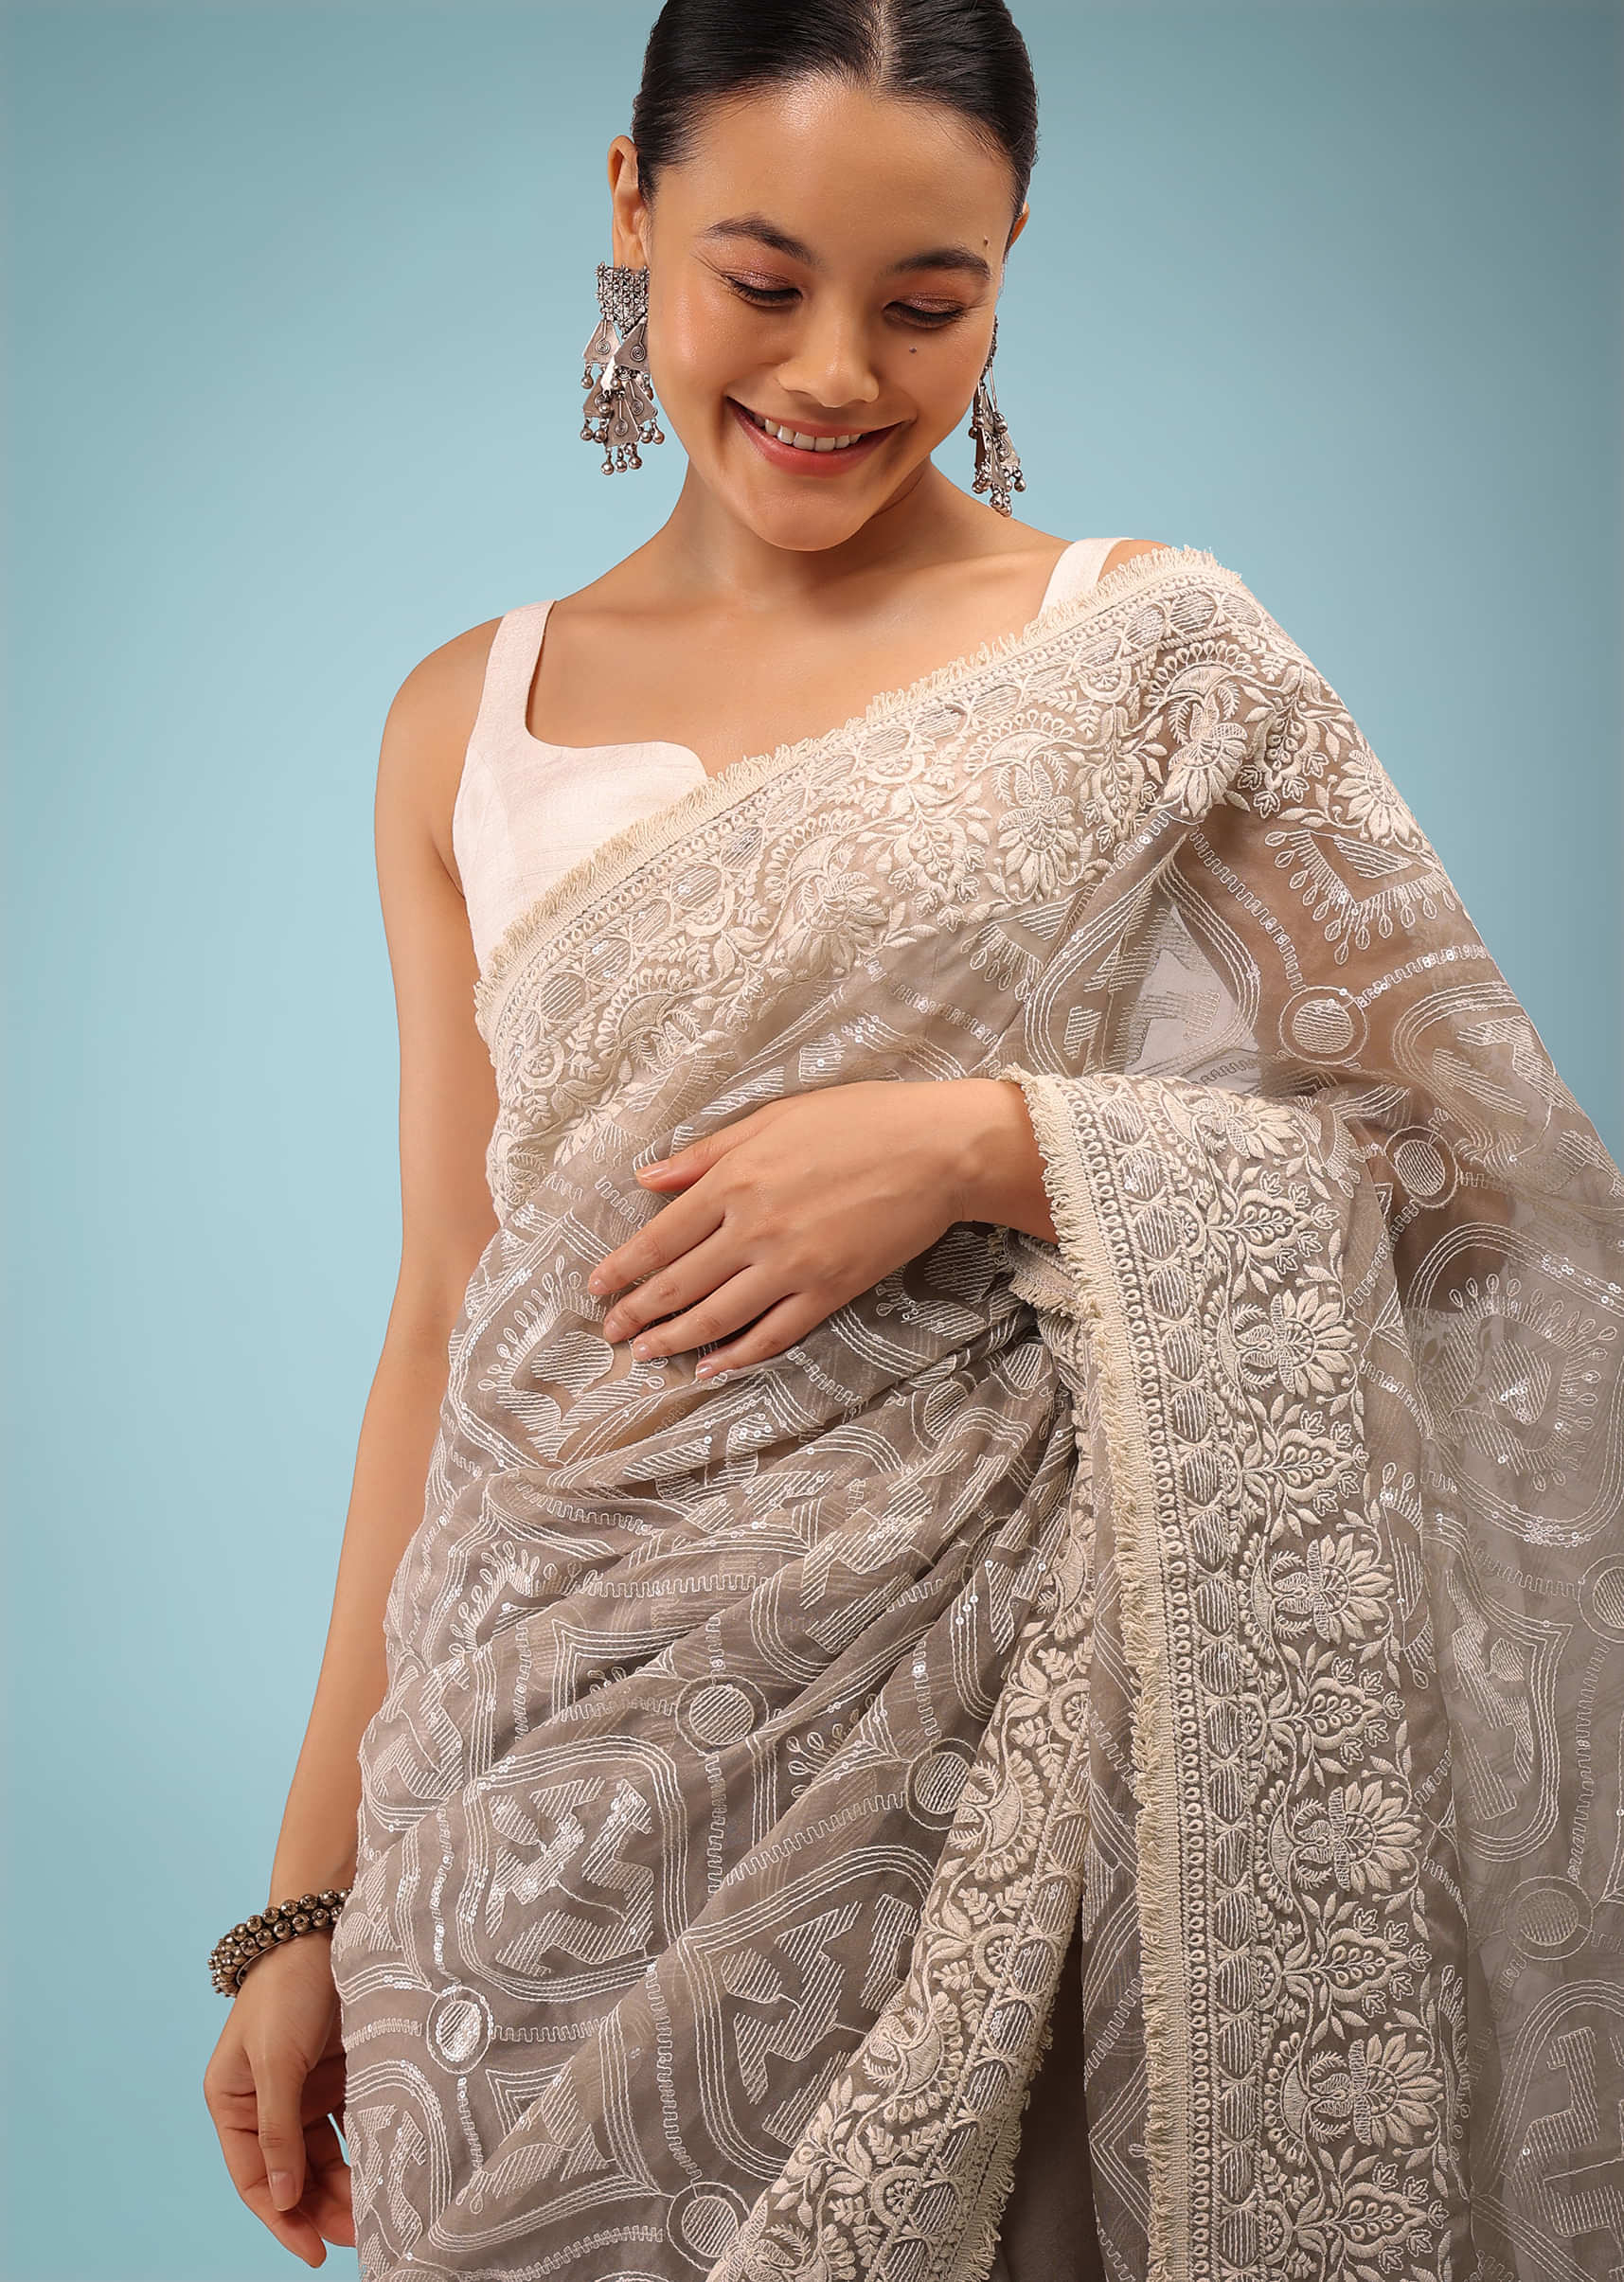 Fog Grey Organza Saree In Moroccan Lucknowi Thread Work, It Has Sequins Embroidery Detailing All Over